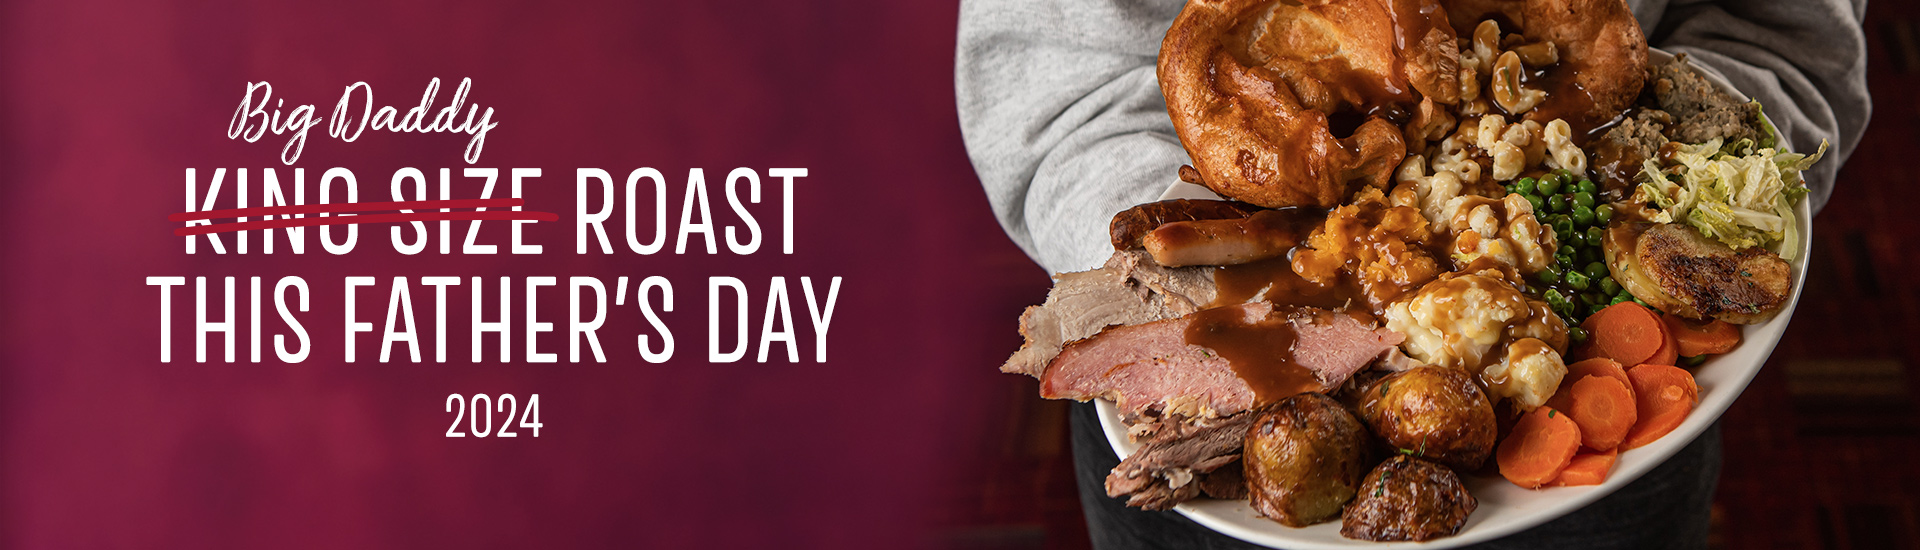 Father’s day carvery in Lichfield, Father’s day at Toby Carvery Shenstone